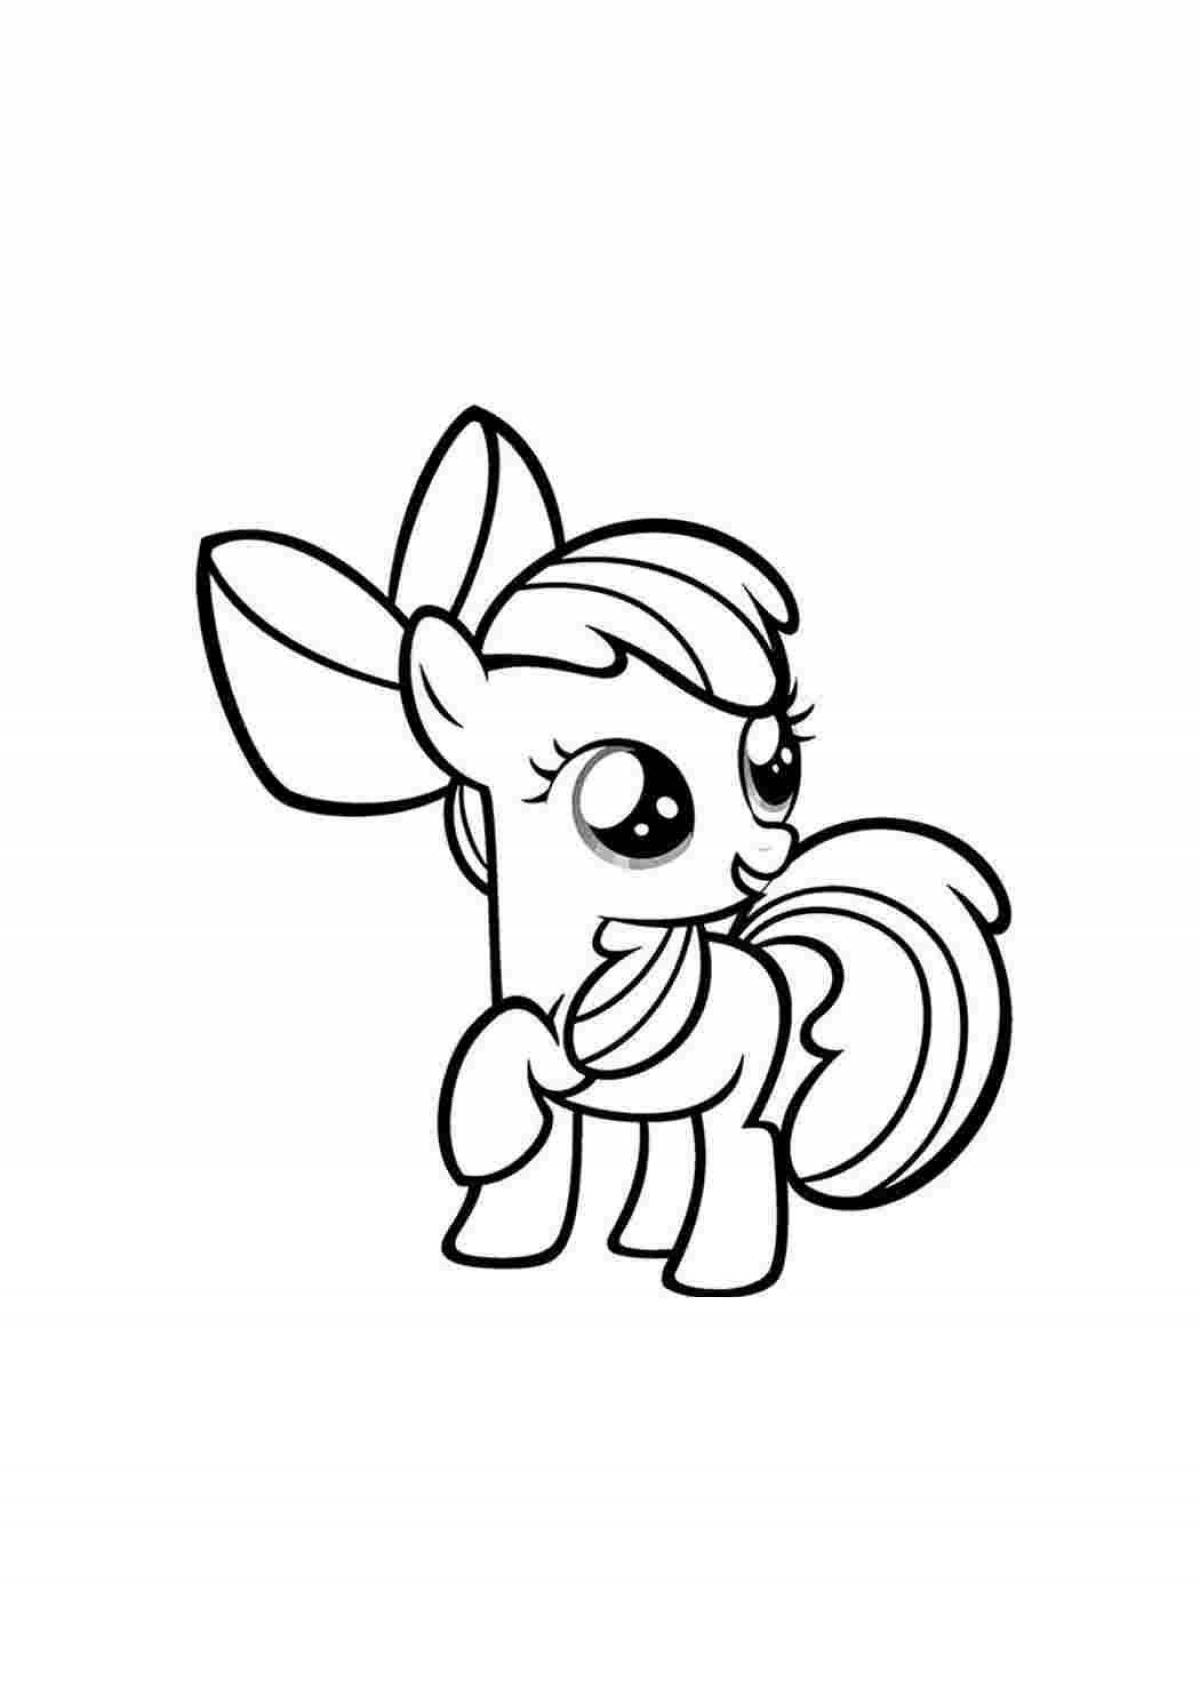 Blissful my little pony coloring page for kids